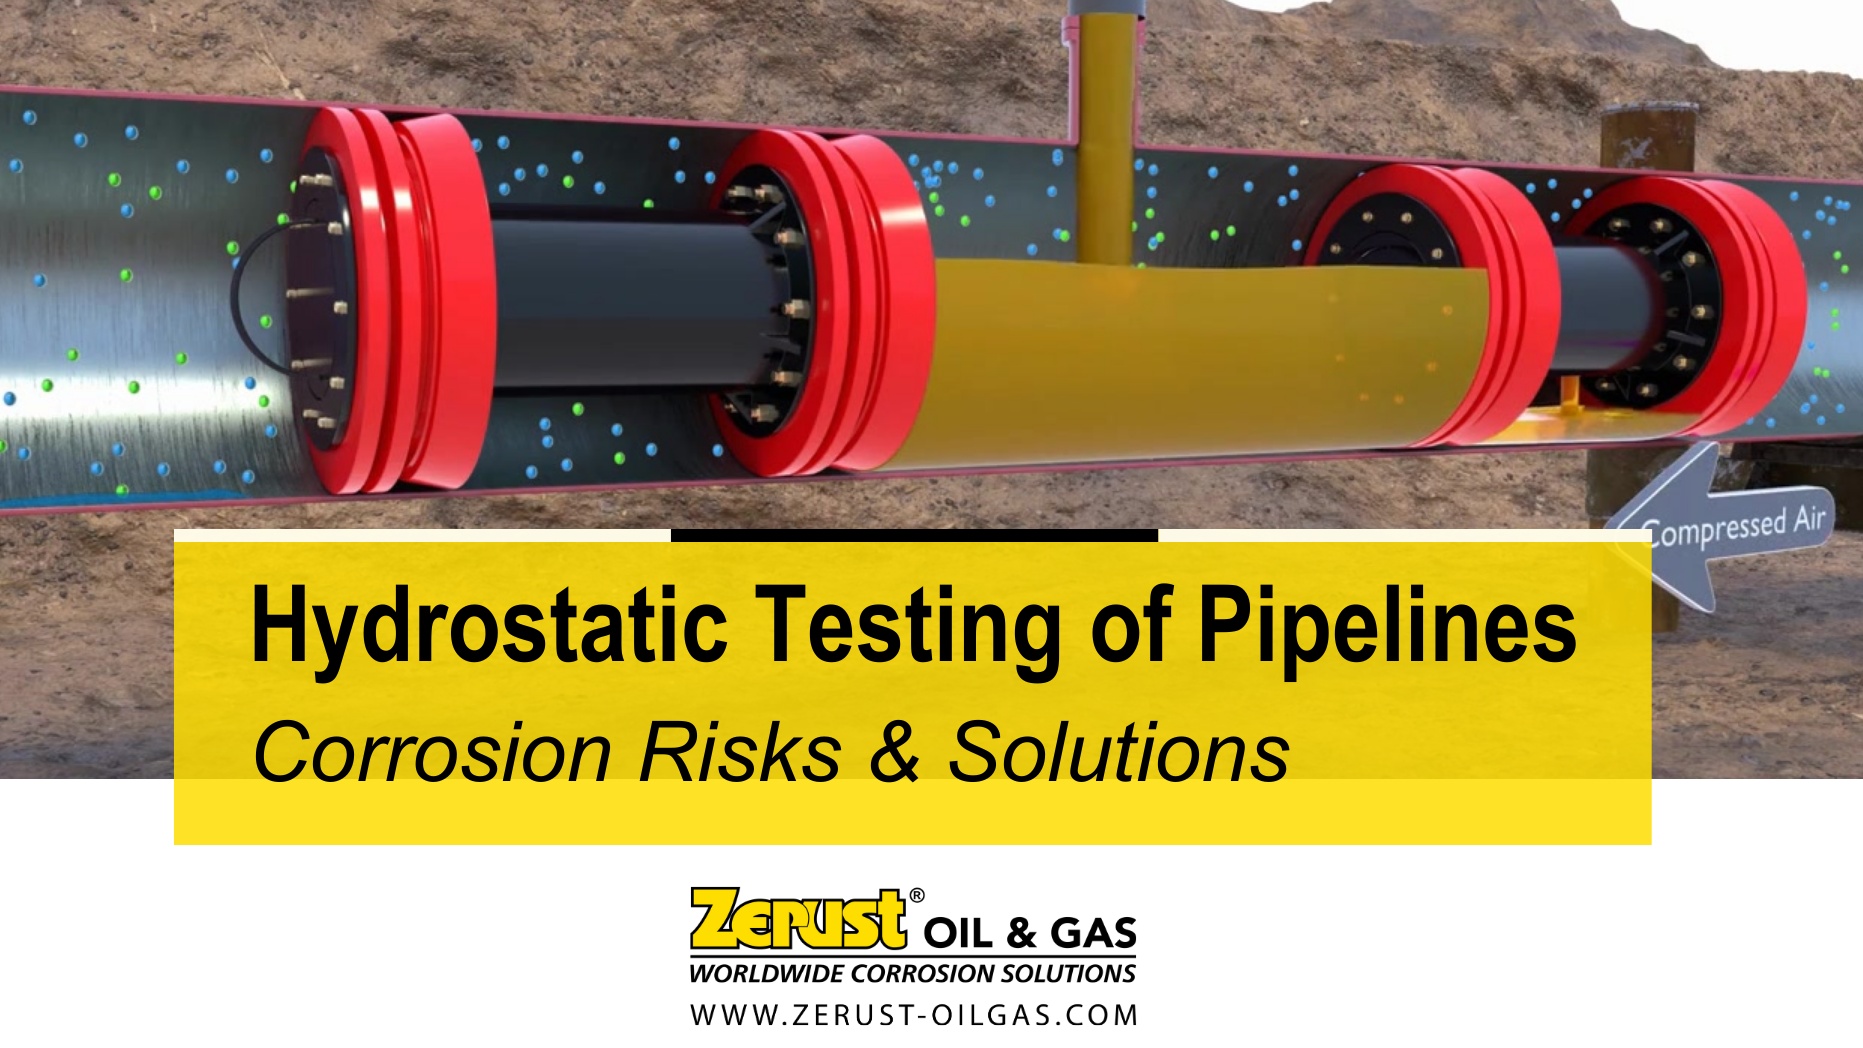 Hydrostatic Testing of Pipelines - Corrosion Risks & Solutions